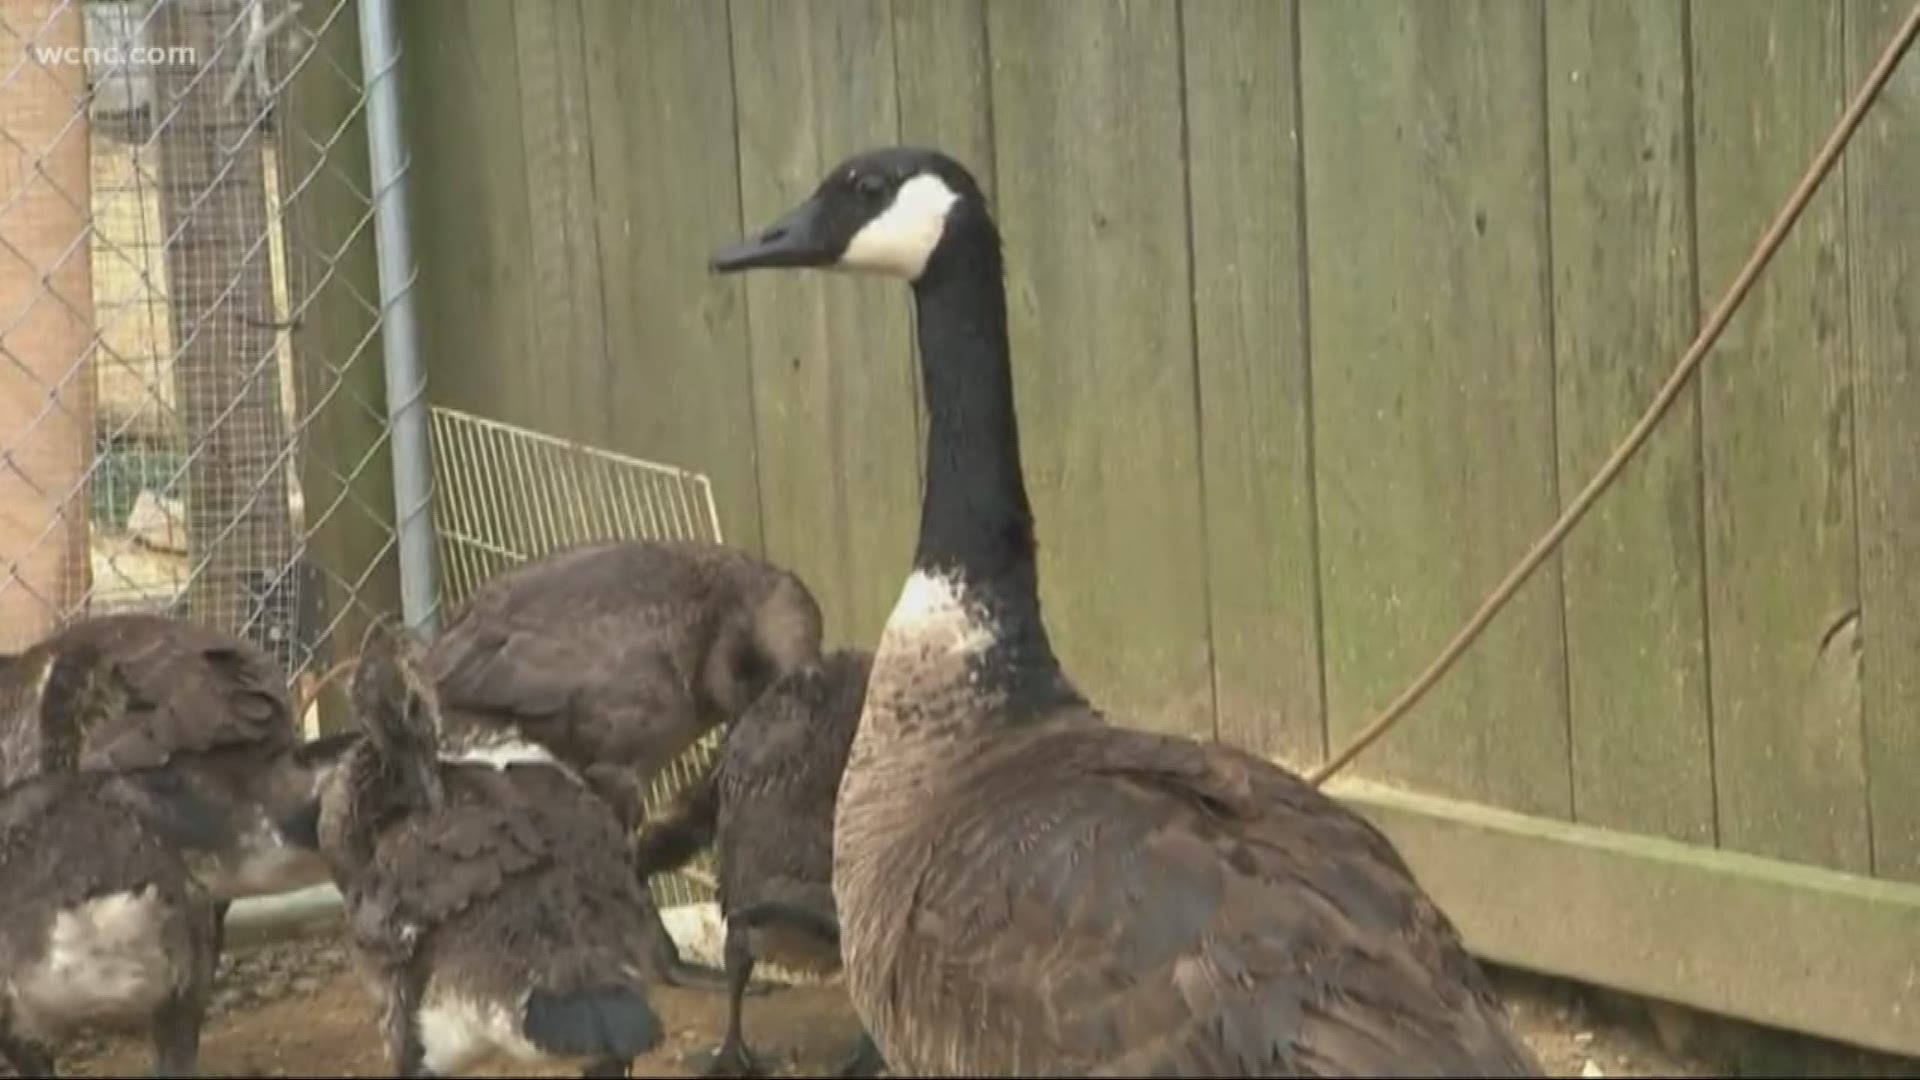 The goose is now safe at the rescue center and is being treated for emaciation and dehydration.